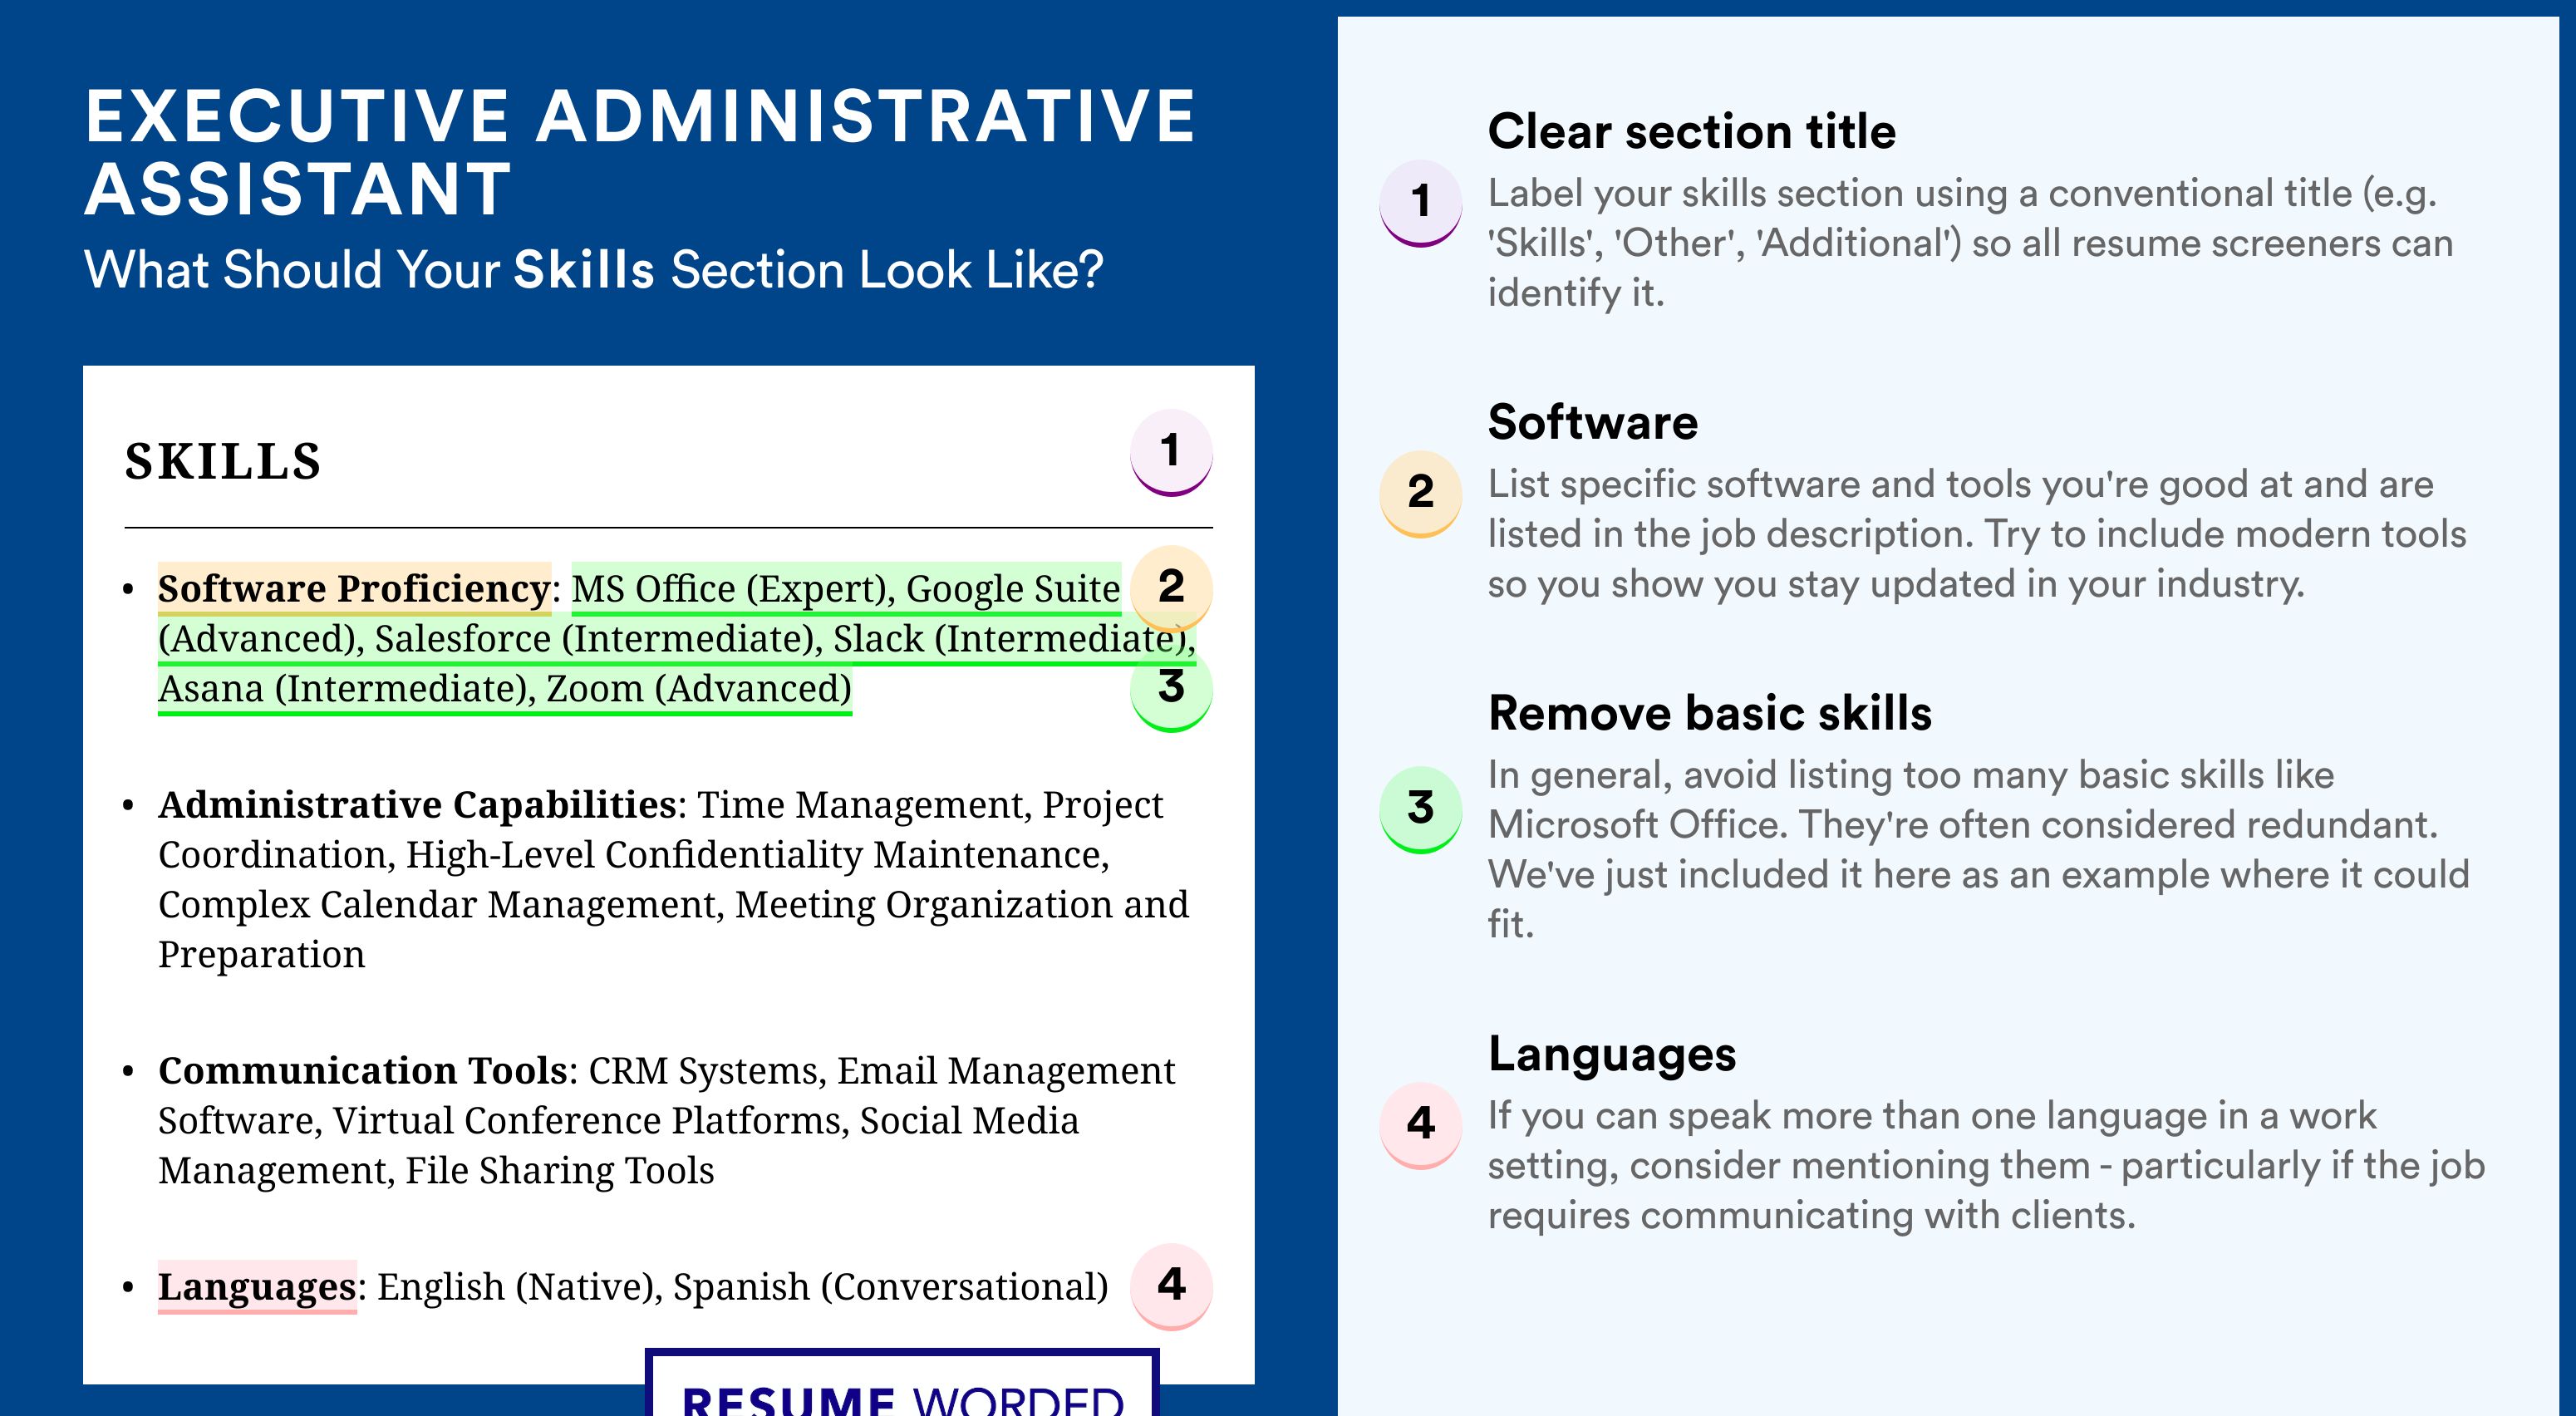 How To Write Your Skills Section - Executive Administrative Assistant Roles